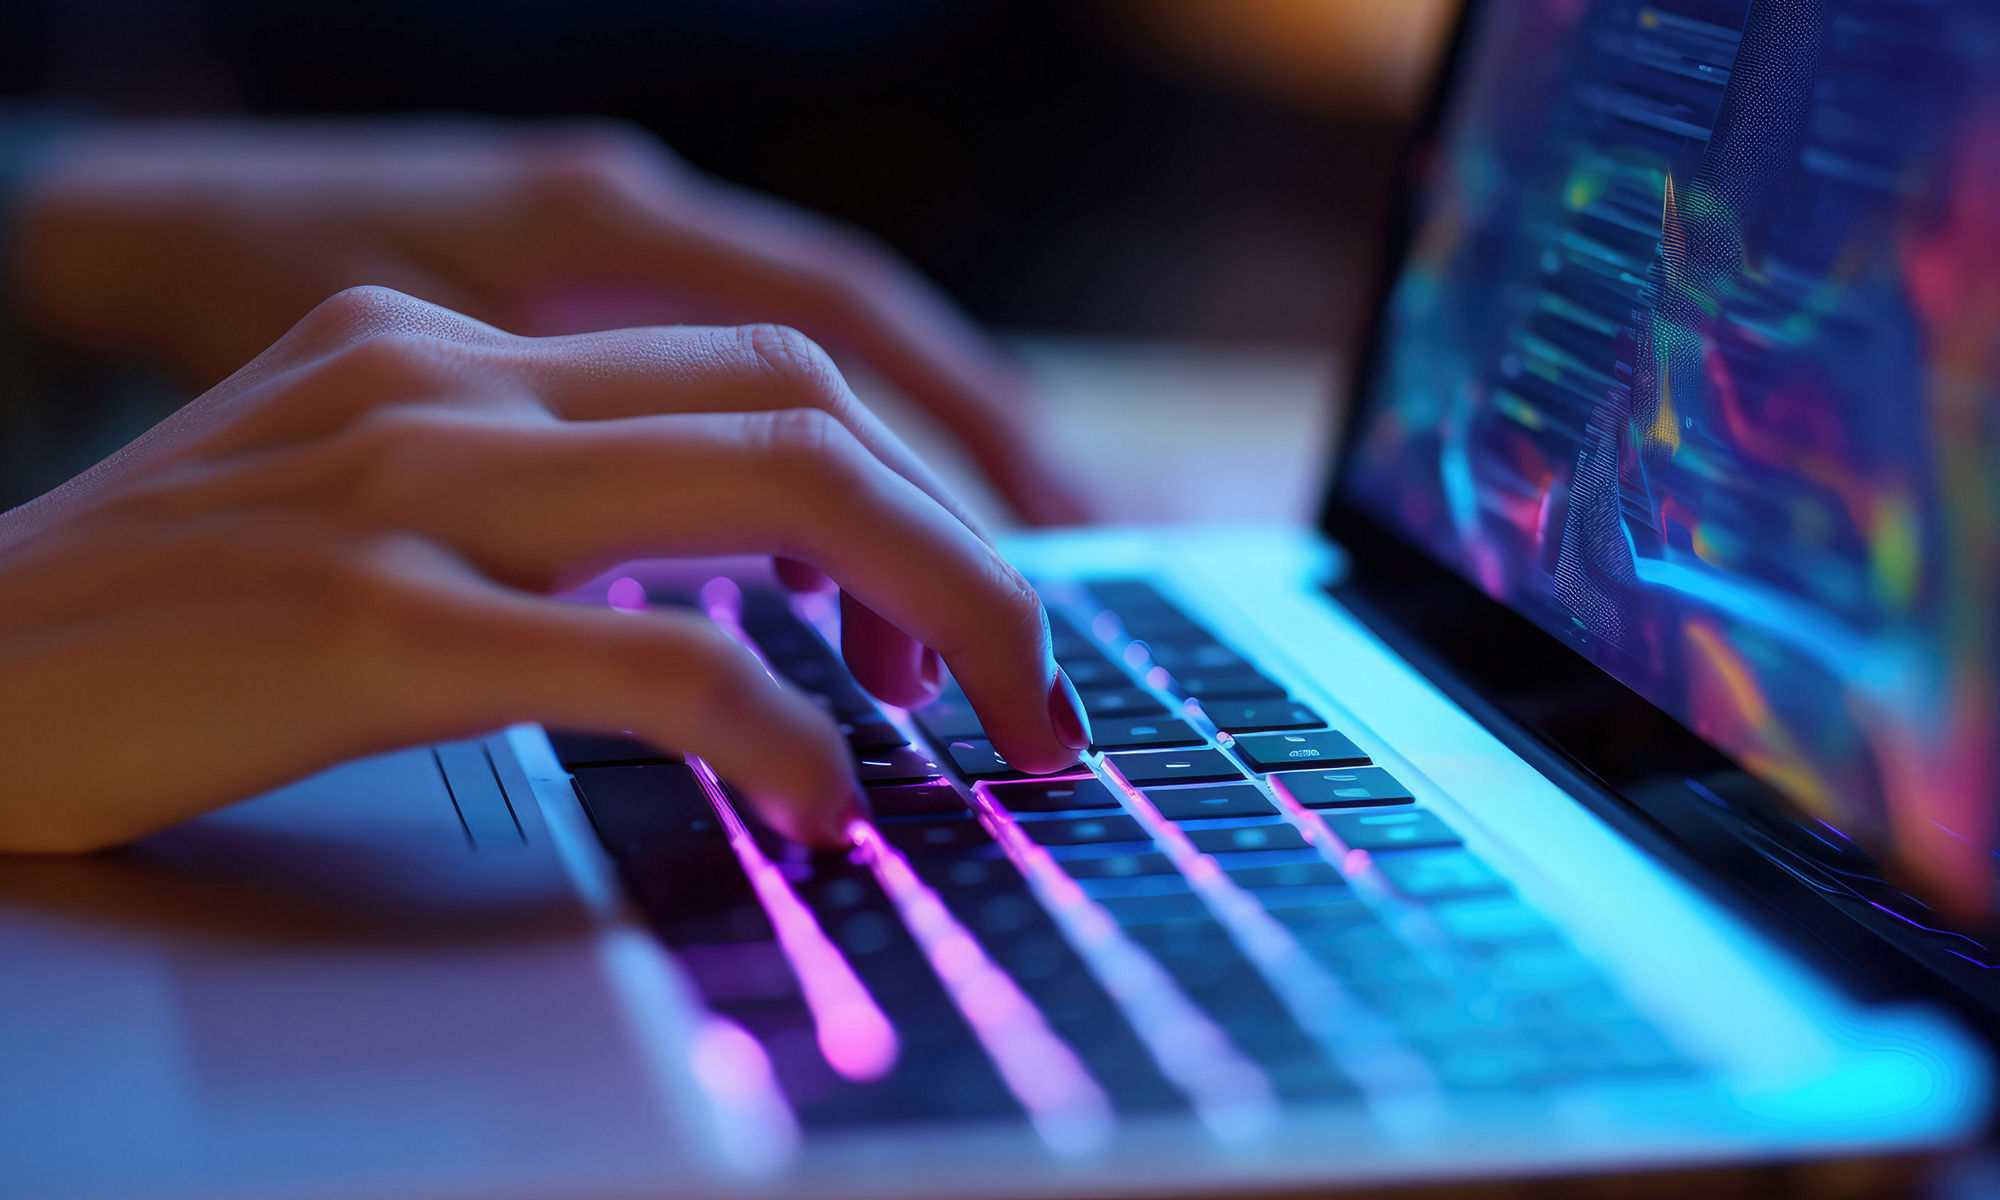 Act of typing on the laptop keyboard with some colorful lights in the background and on screen